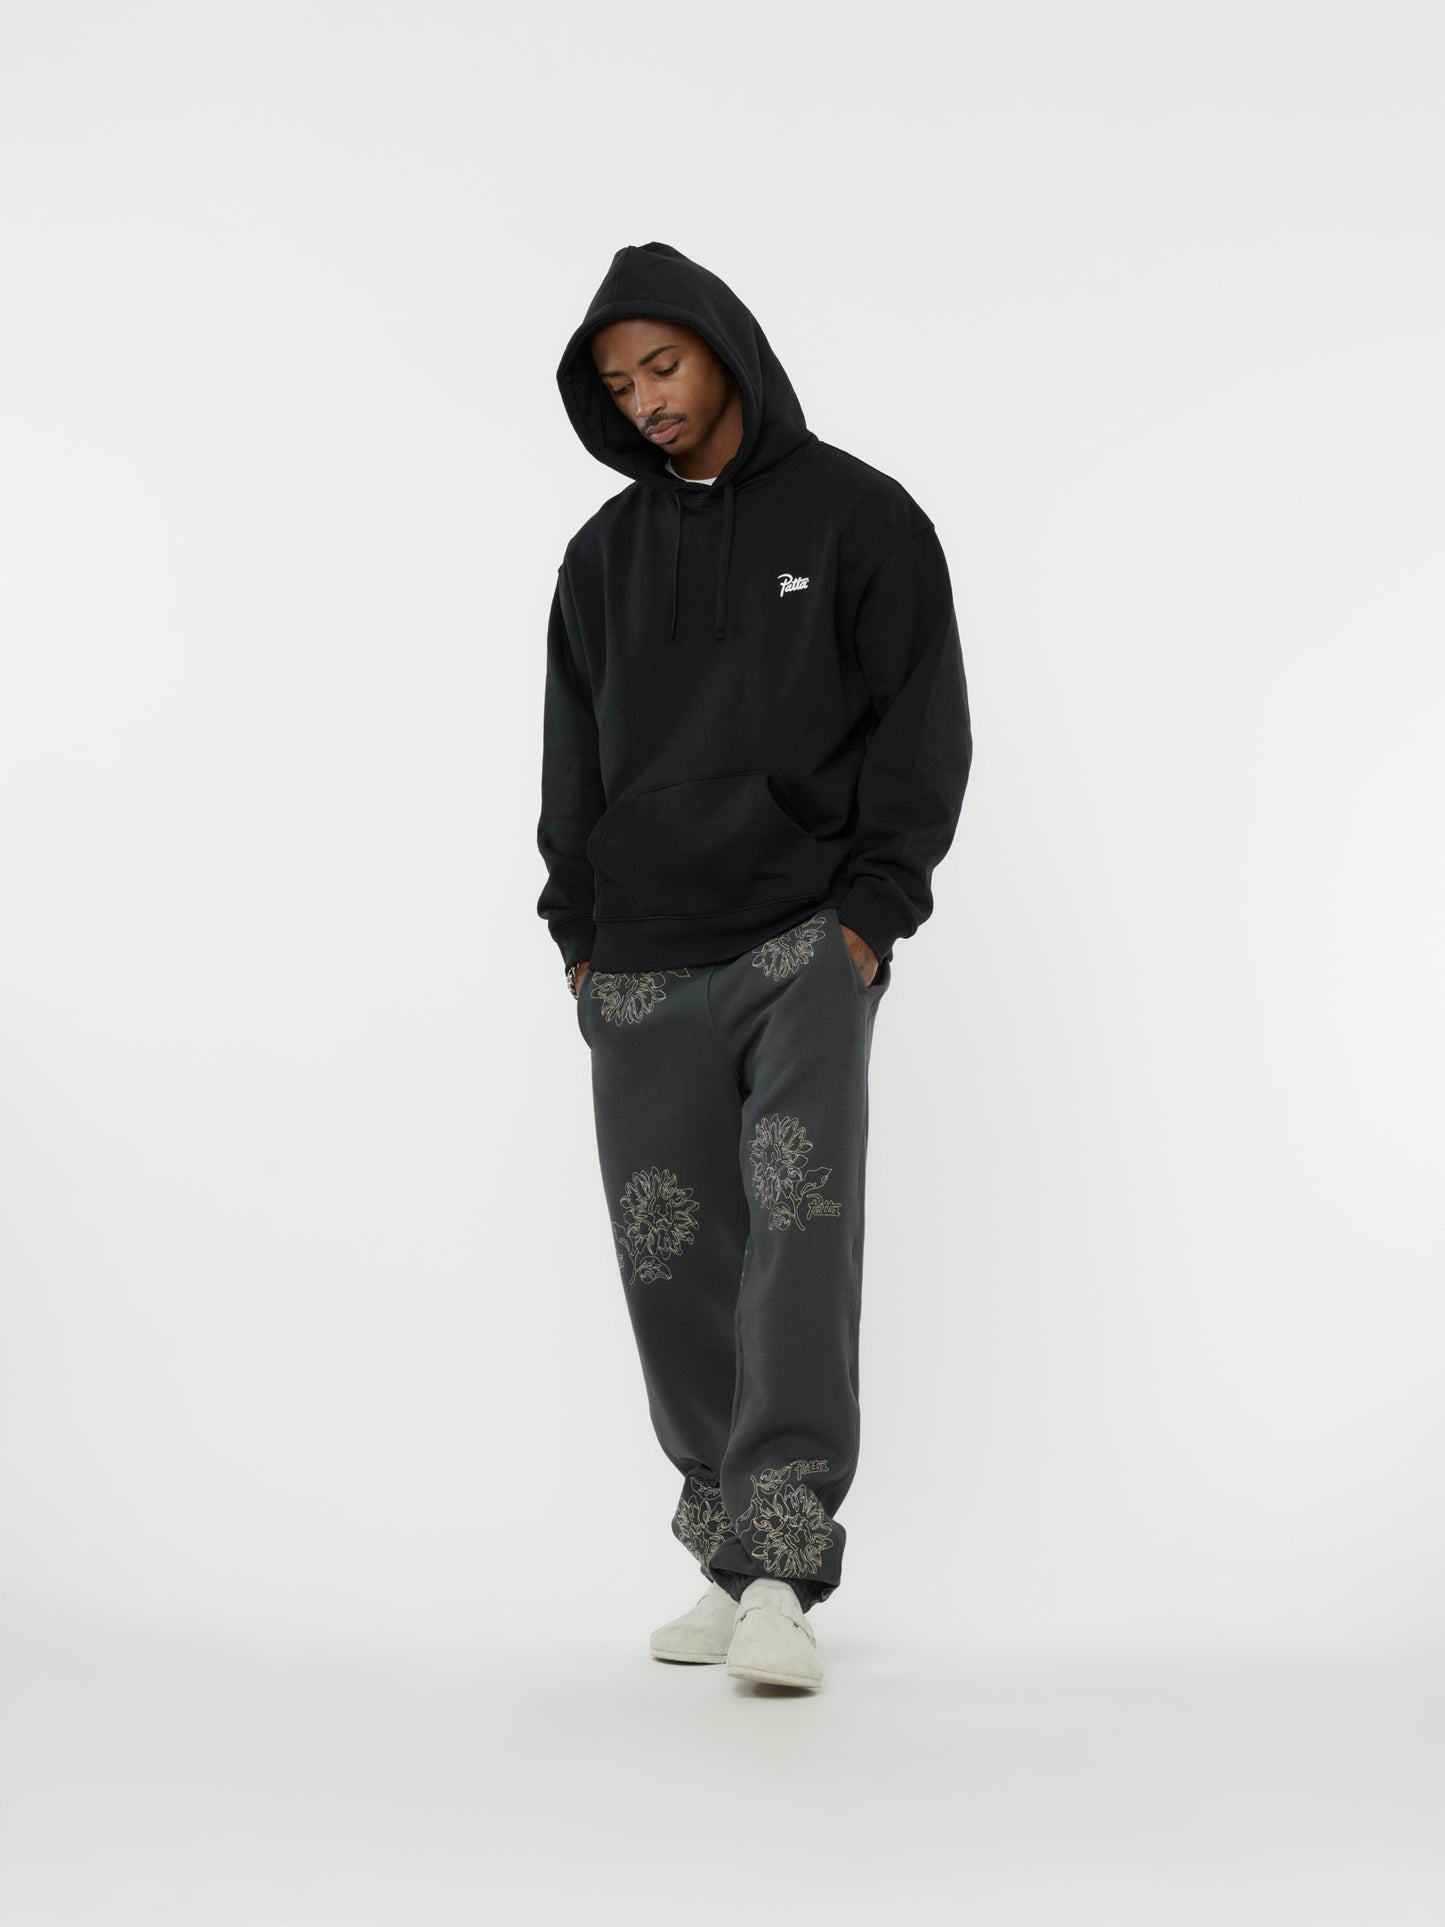 Patta Fovever And Always Boxy Hooded Sweater (Black)